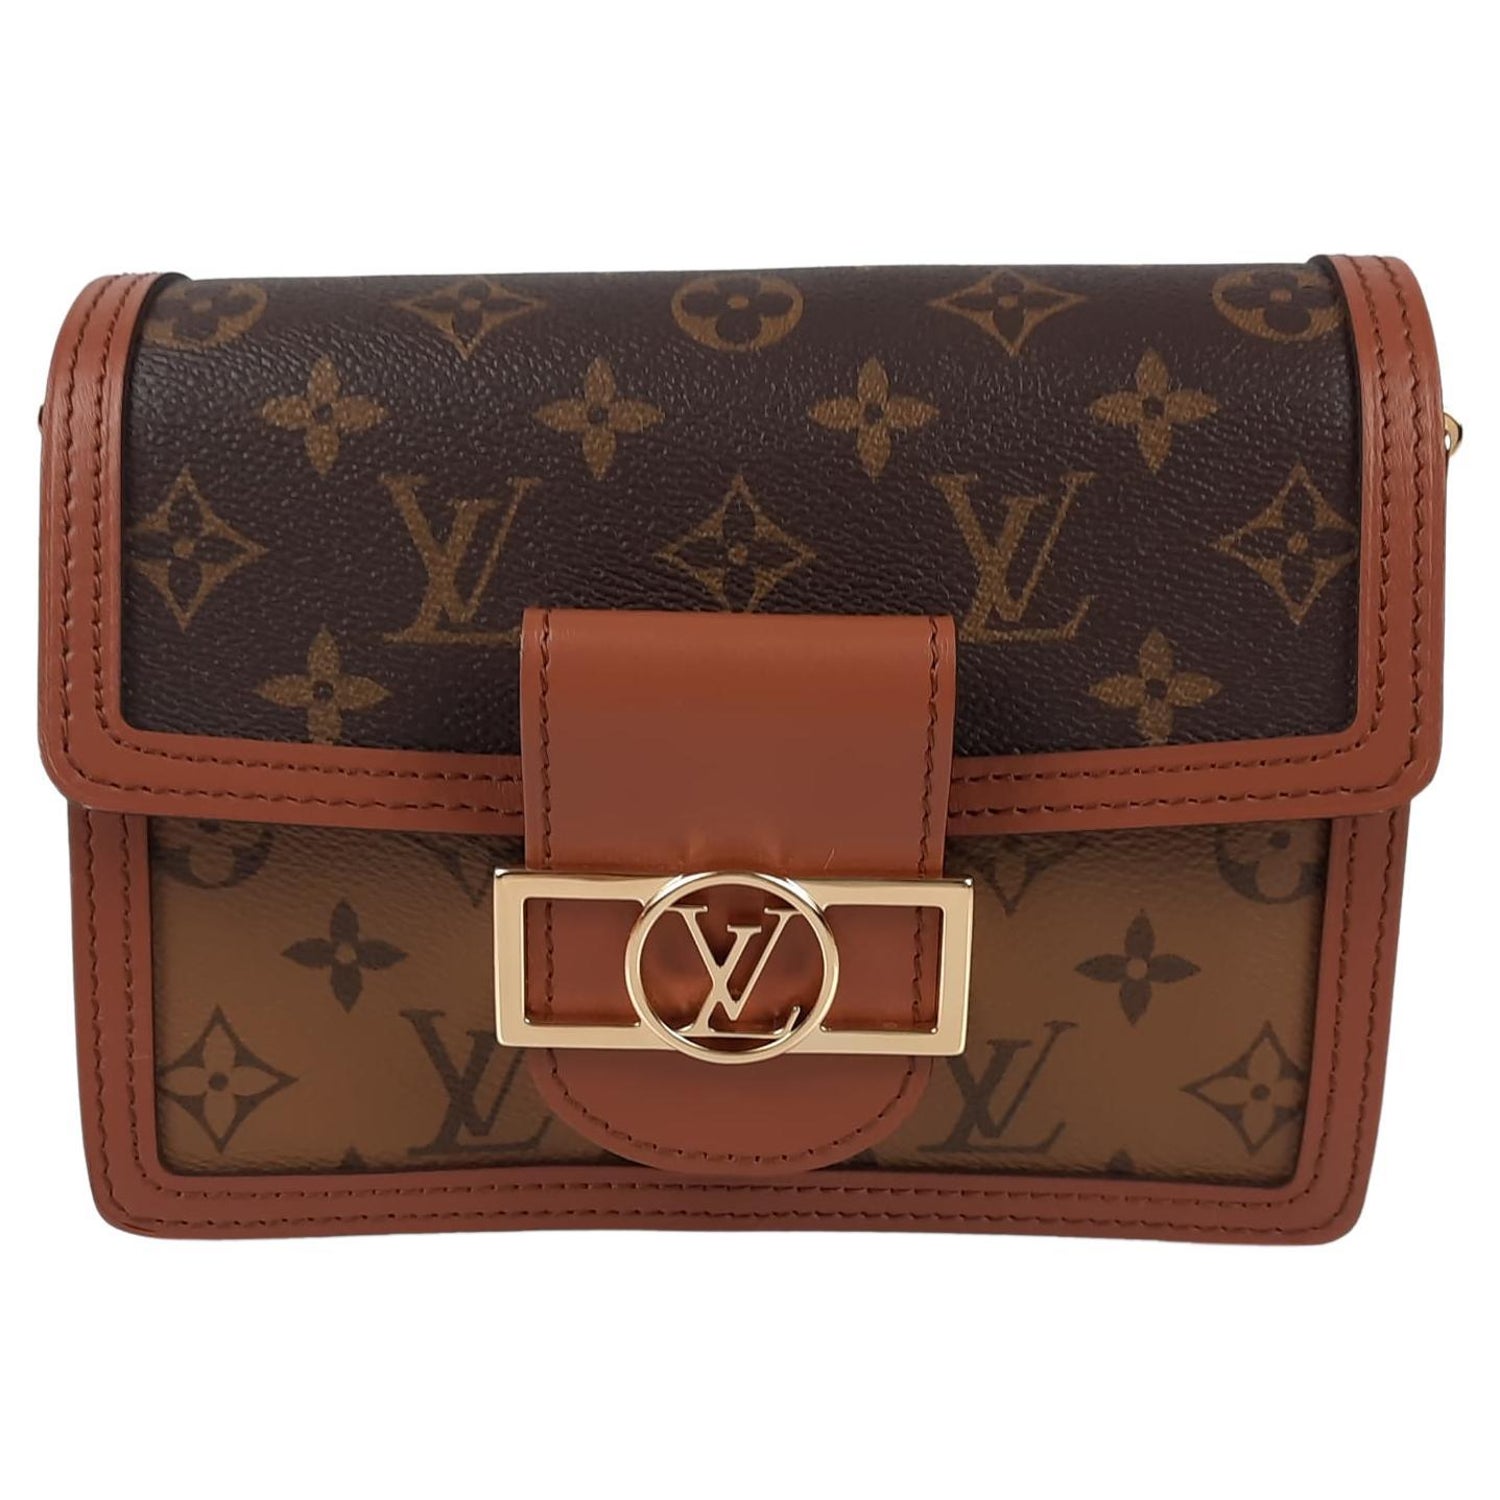 Monogram Dauphine Belt bag in Monogram & Reverse Monogram Coated Canvas  with a Calfskin trim and gold tone hardware and black microfibre lining. Louis  Vuitton. 2019., Handbags and Accessories Online